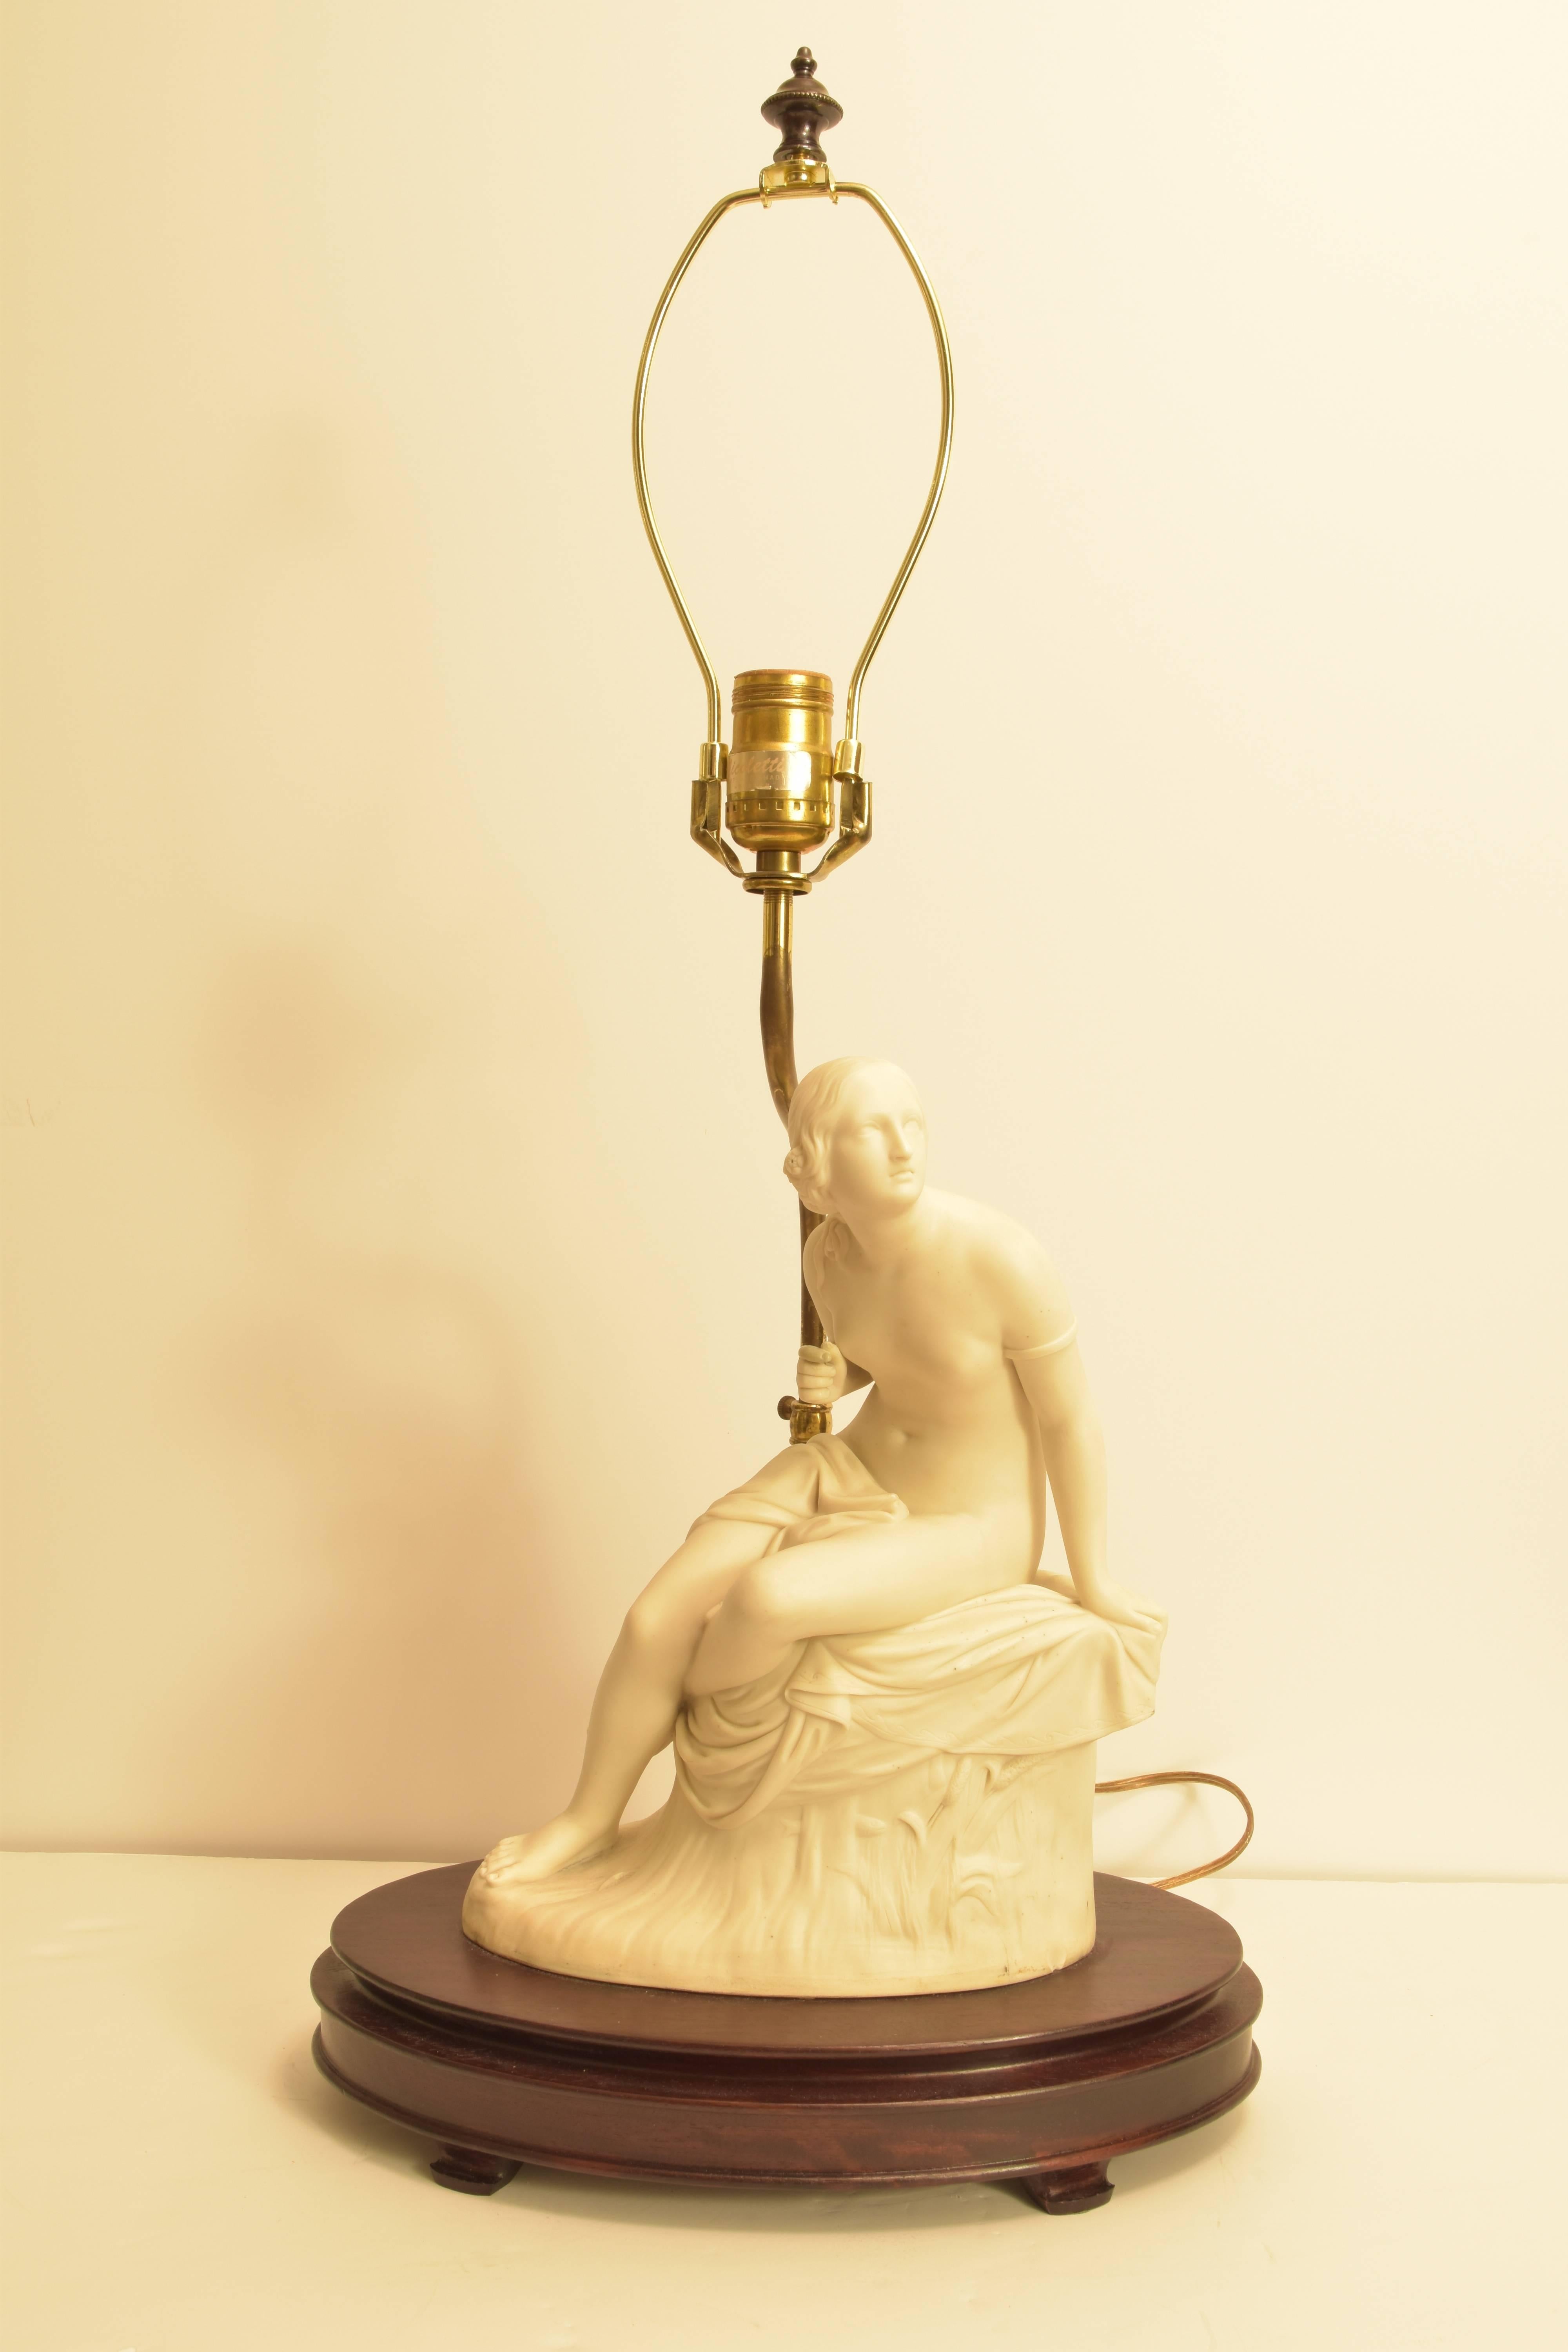 Porcelain lamp with a female figure mounted on a wooden base. 

Lamp measures 17